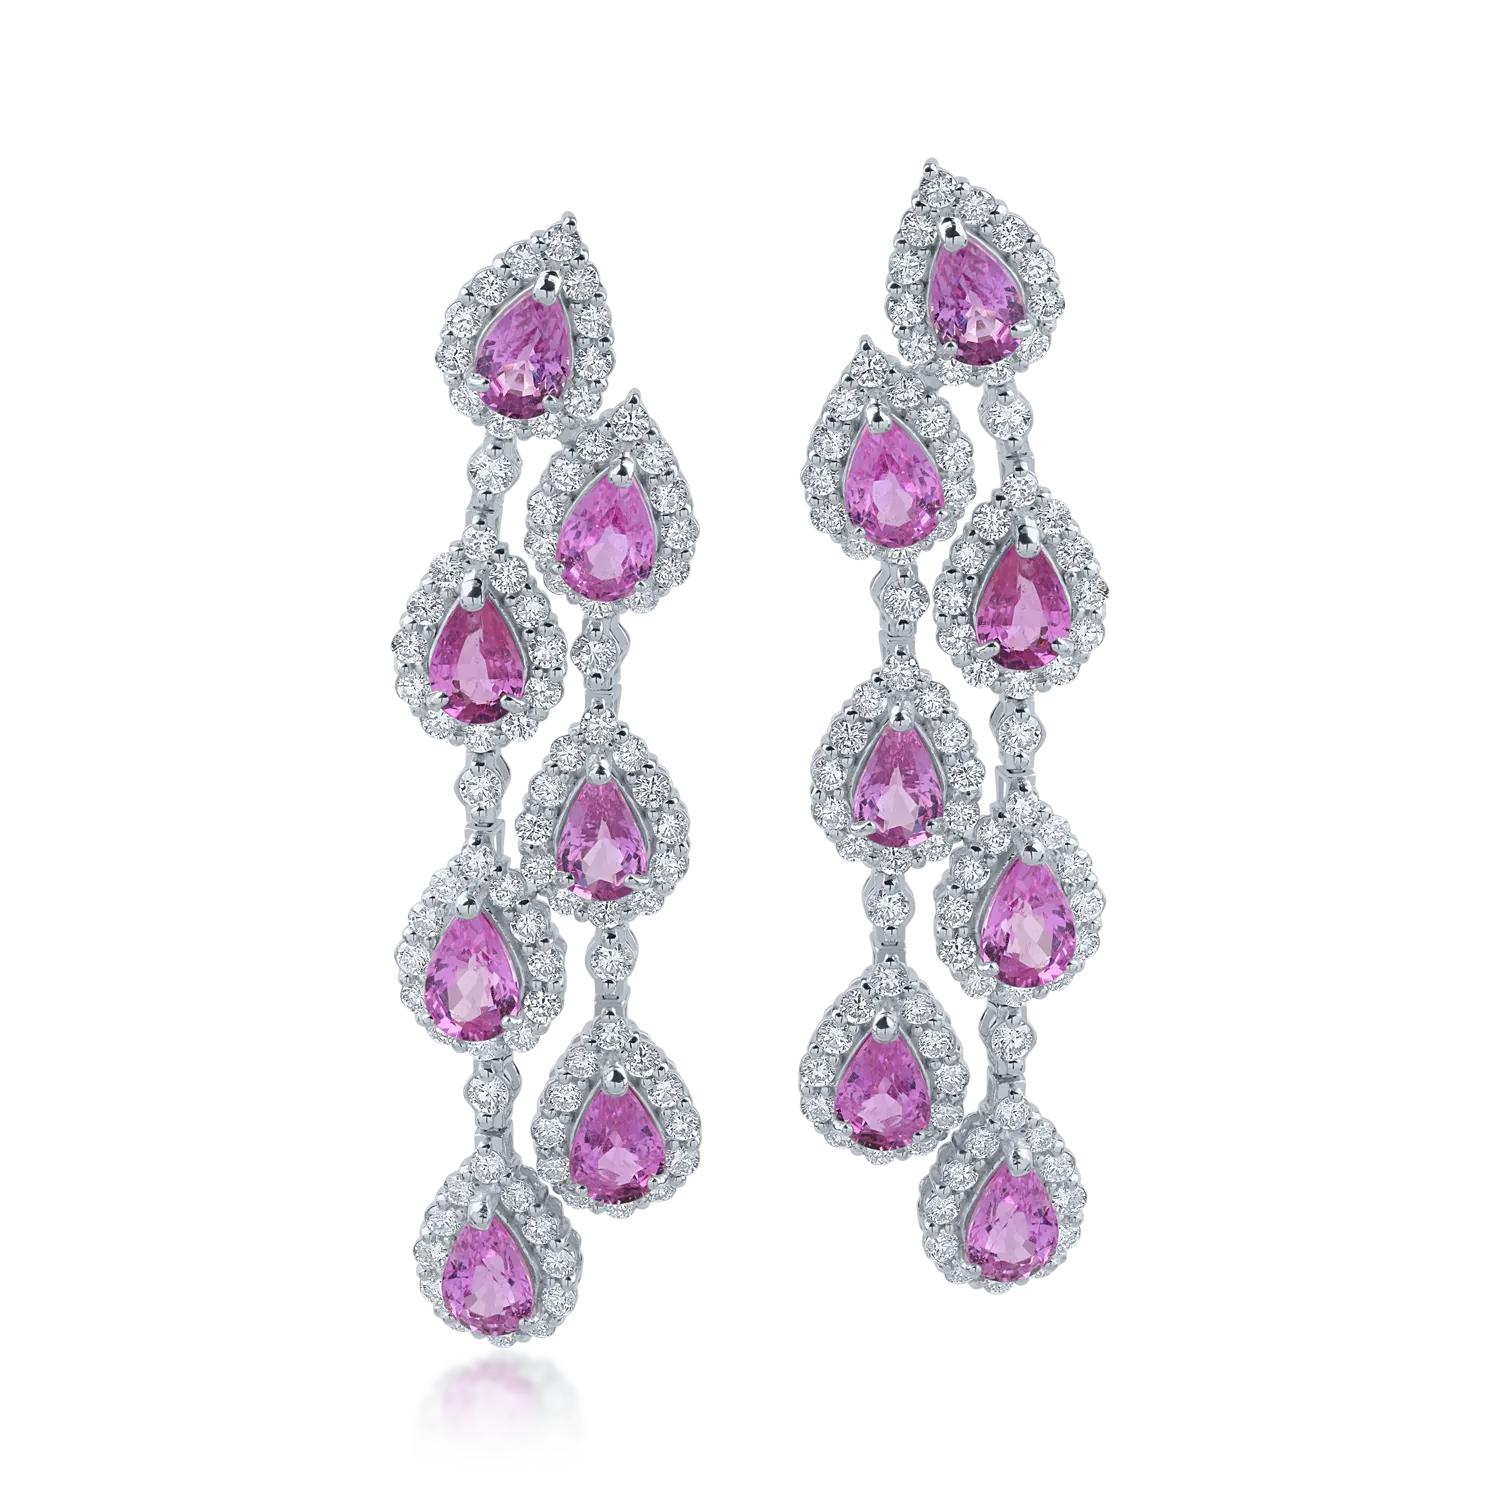 Platinum earrings with 7.35ct pink sapphires and 2.68ct diamonds